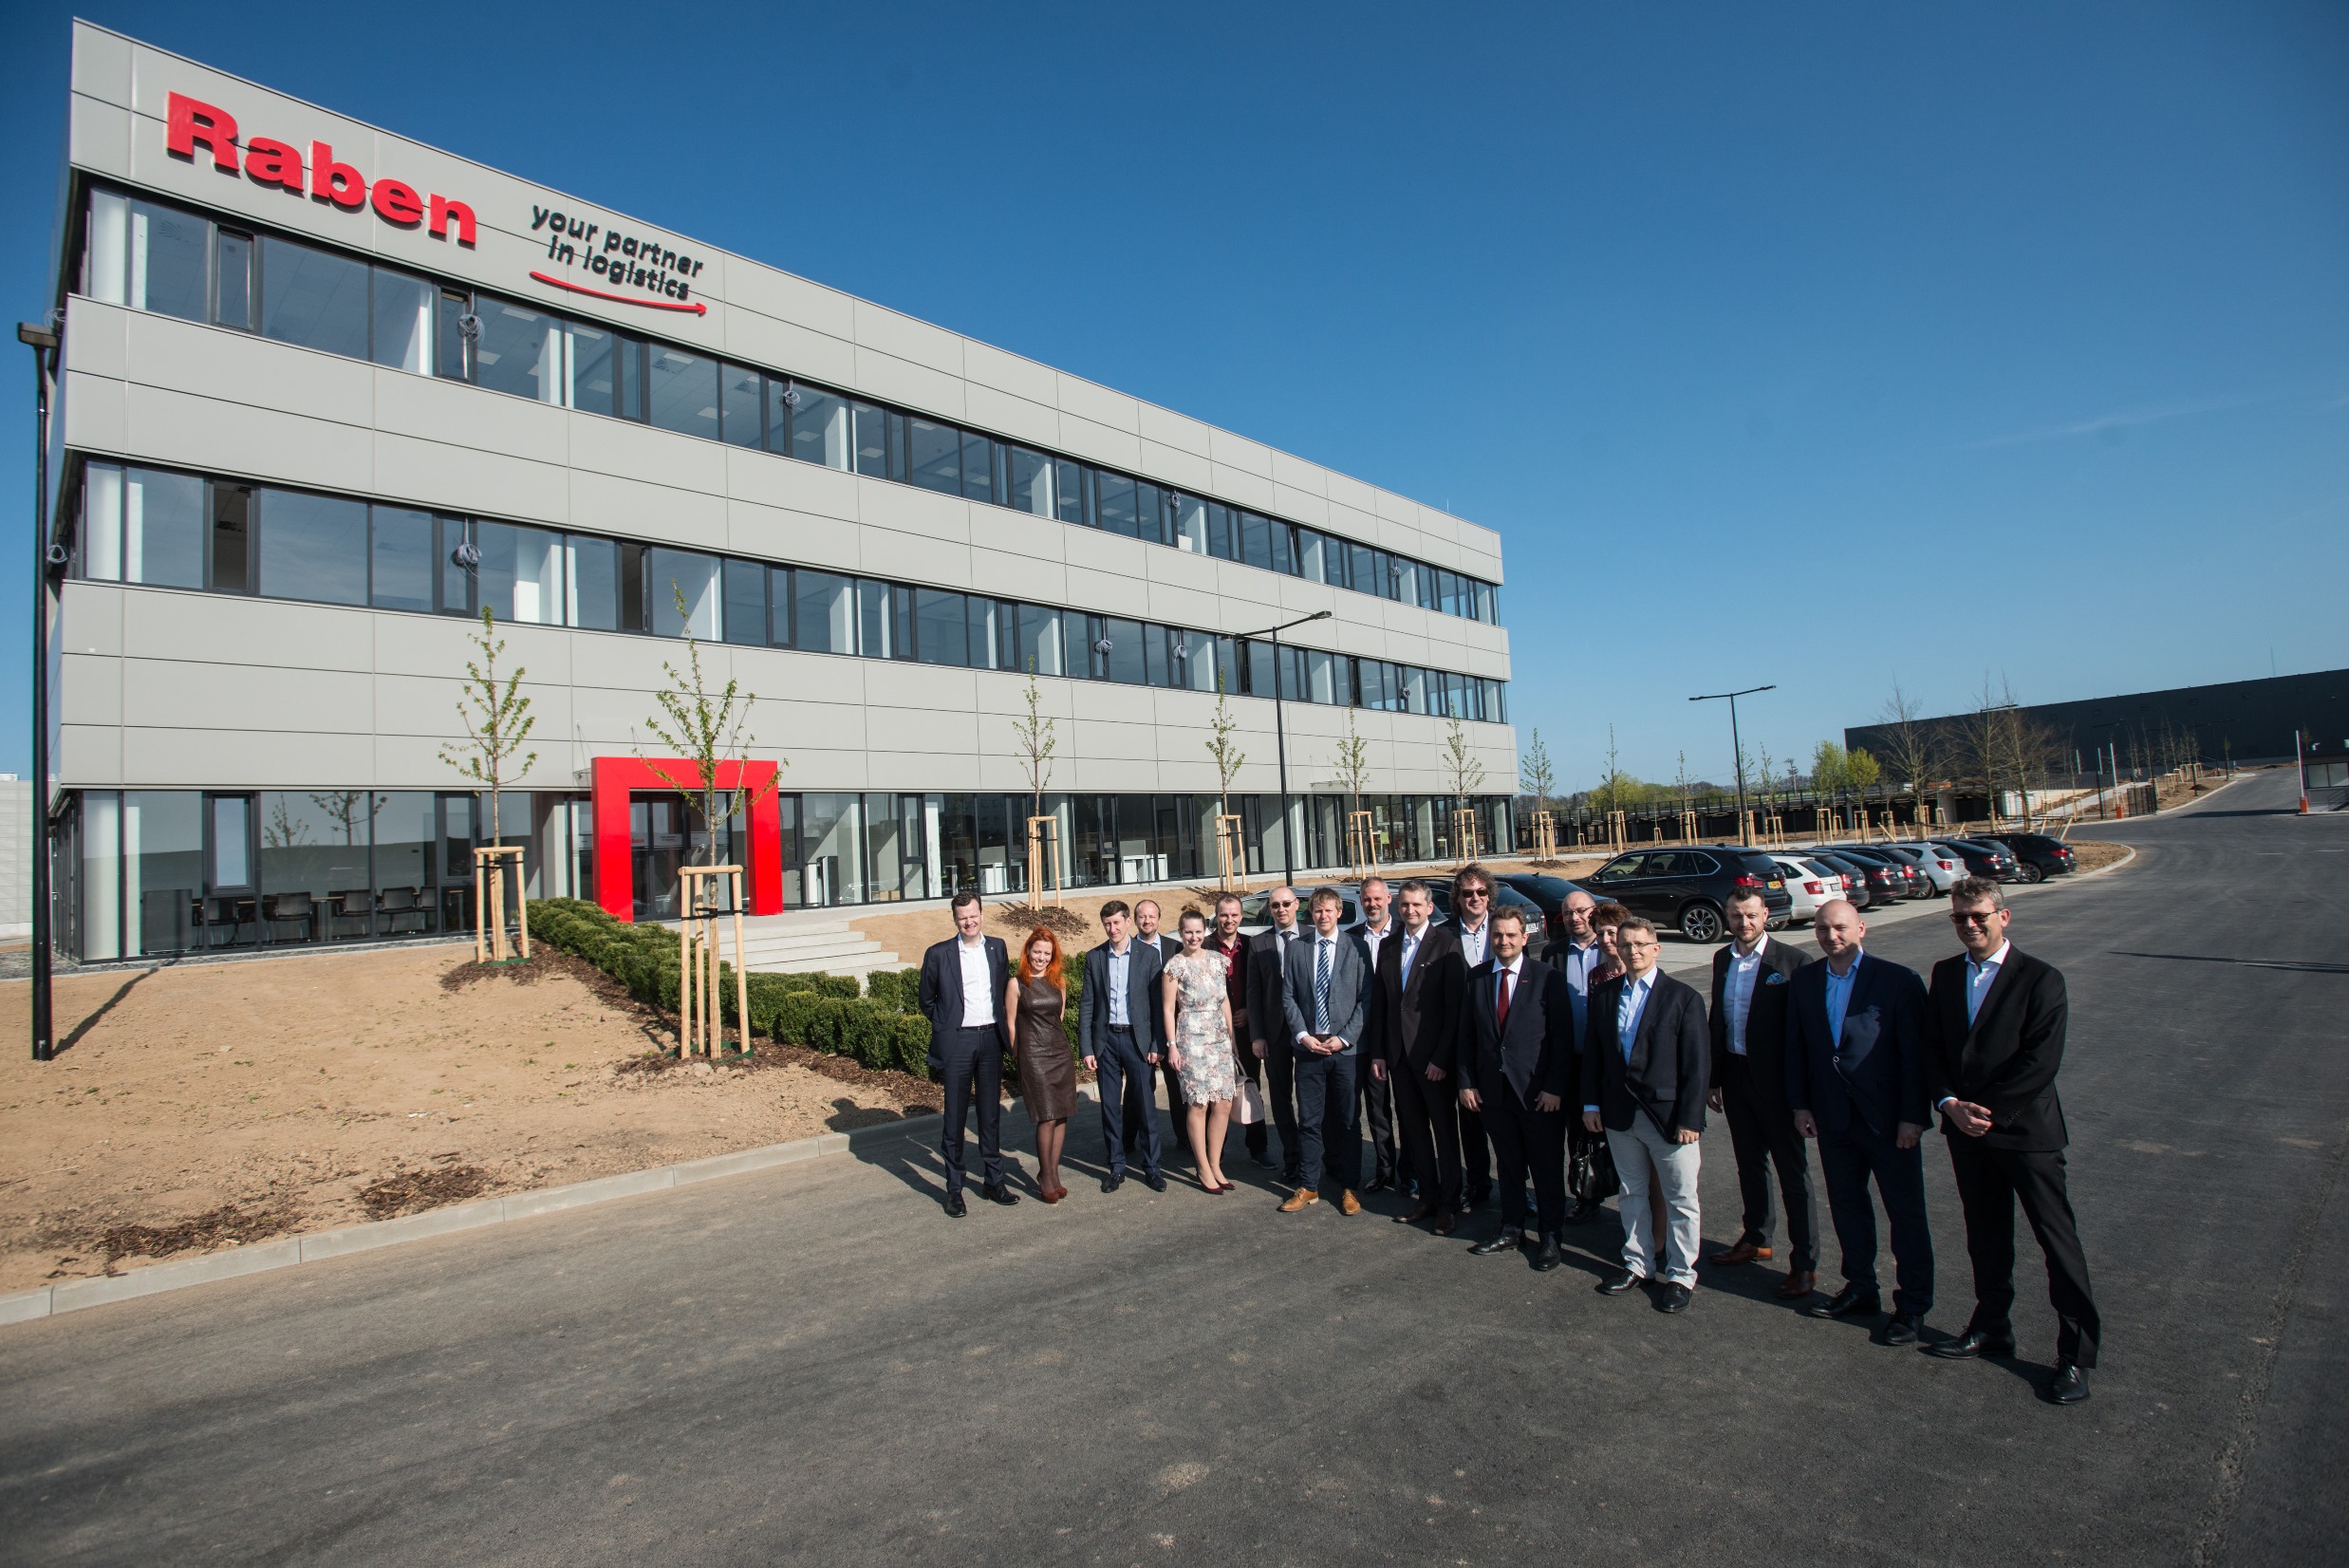 Raben Group sets a new milestone in Central and Eastern Europe